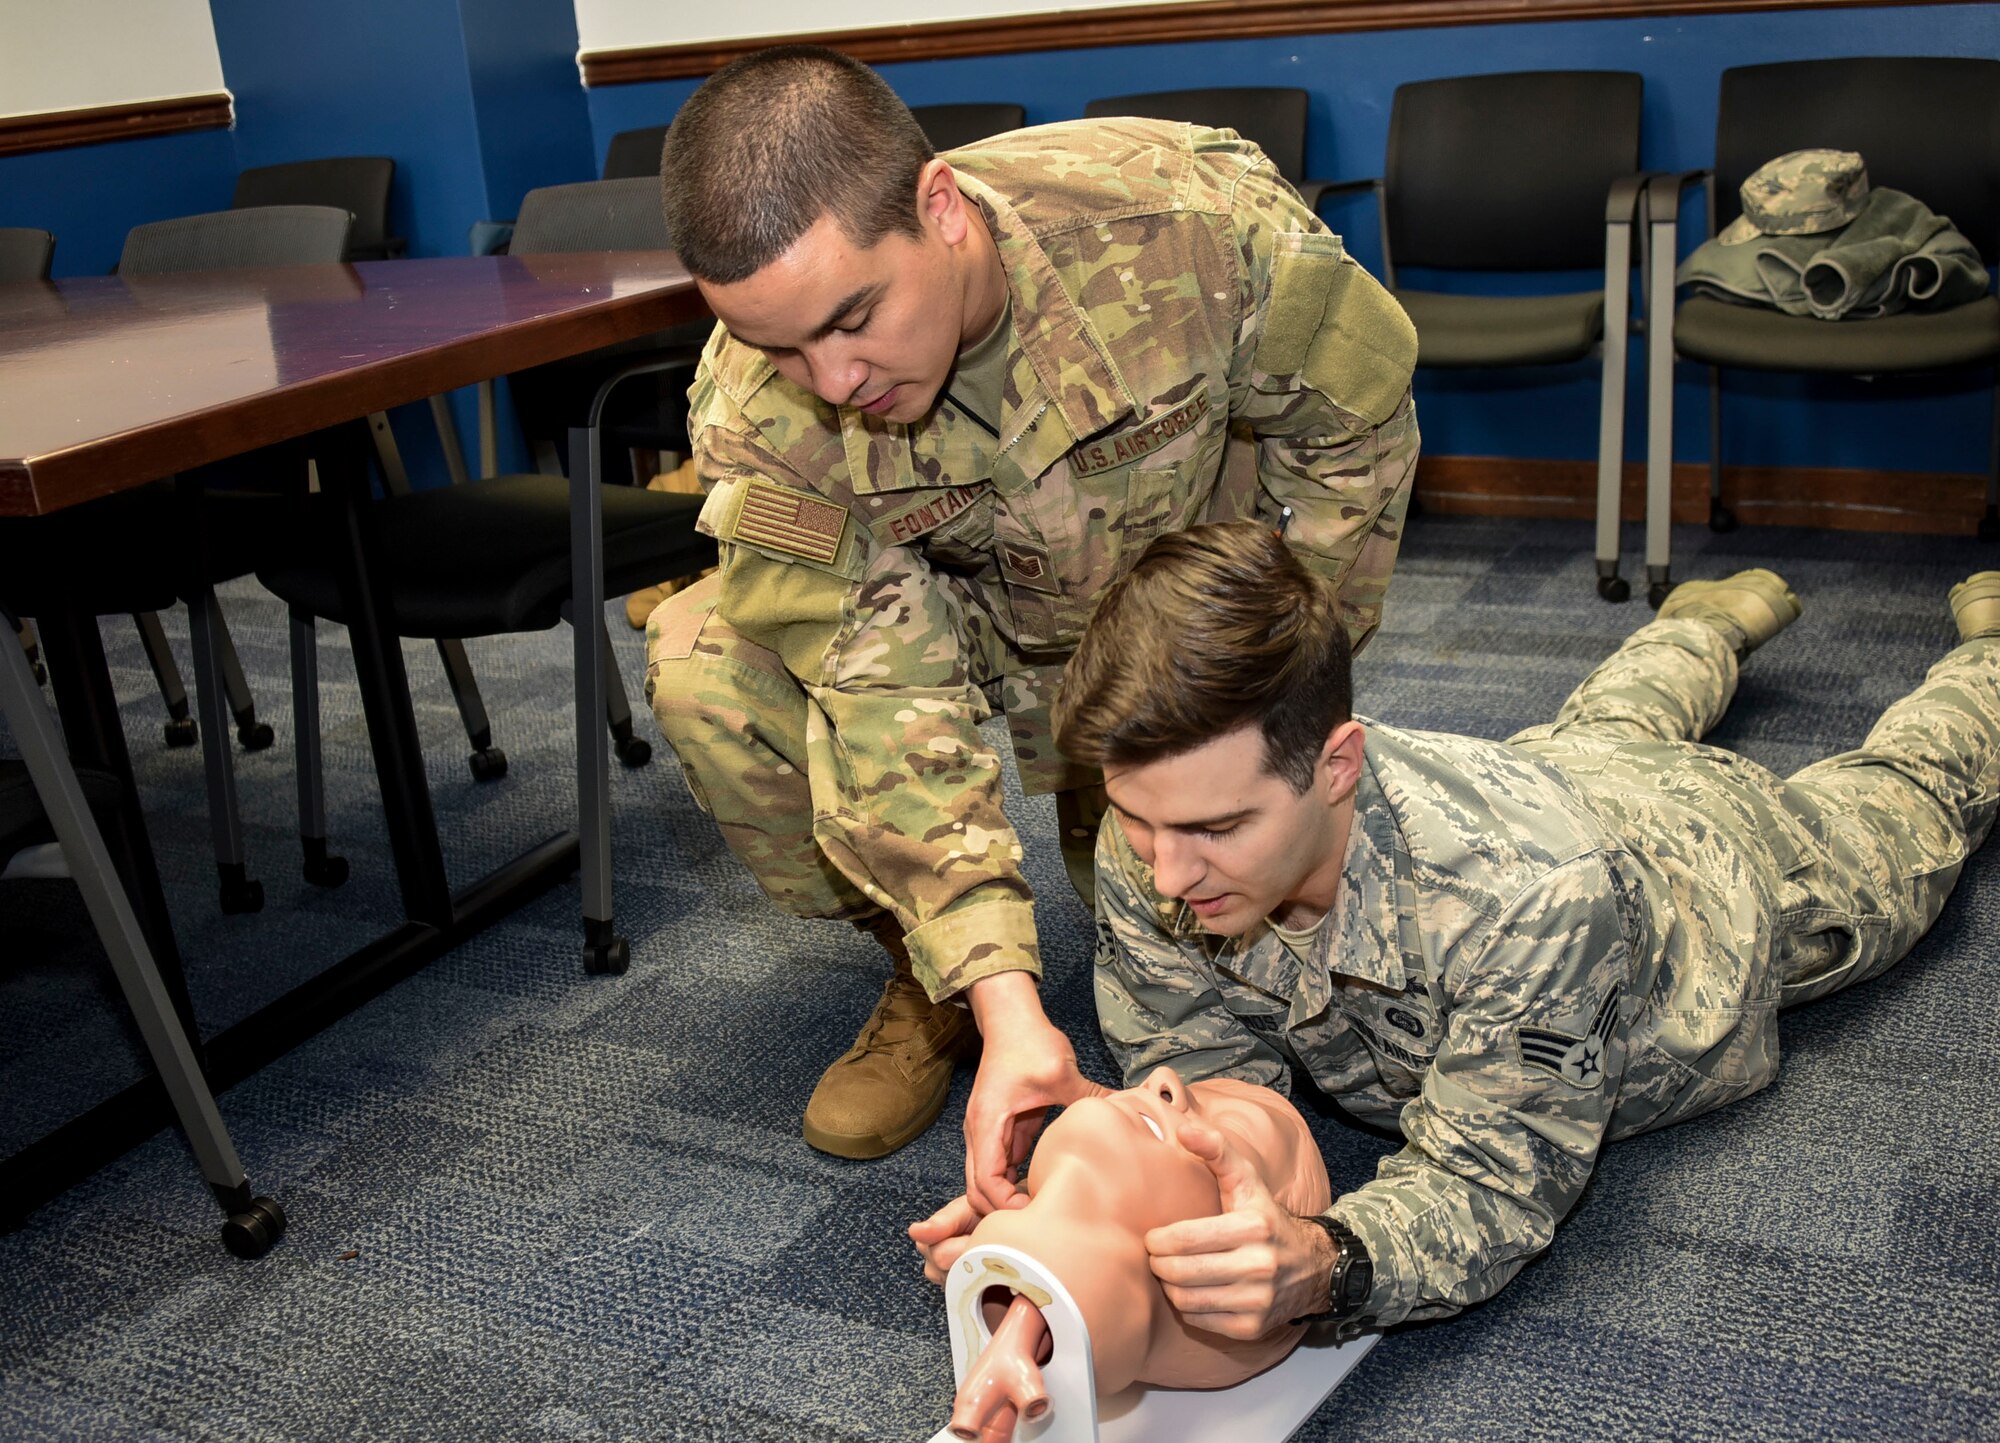 U.S. Air Force Tech. Sgt. Jerediah Fontanos, 70th Intelligence, Surveillance and Reconnaissance Wing Operational Medical technician, demonstrates how to perform a head-tilt, jaw-thrust maneuver during a Self-Aid and Buddy Care training session at Fort George G. Meade, Maryland, Dec. 4, 2018. (U.S. Air Force photo by Staff Sgt. AJ Hyatt)